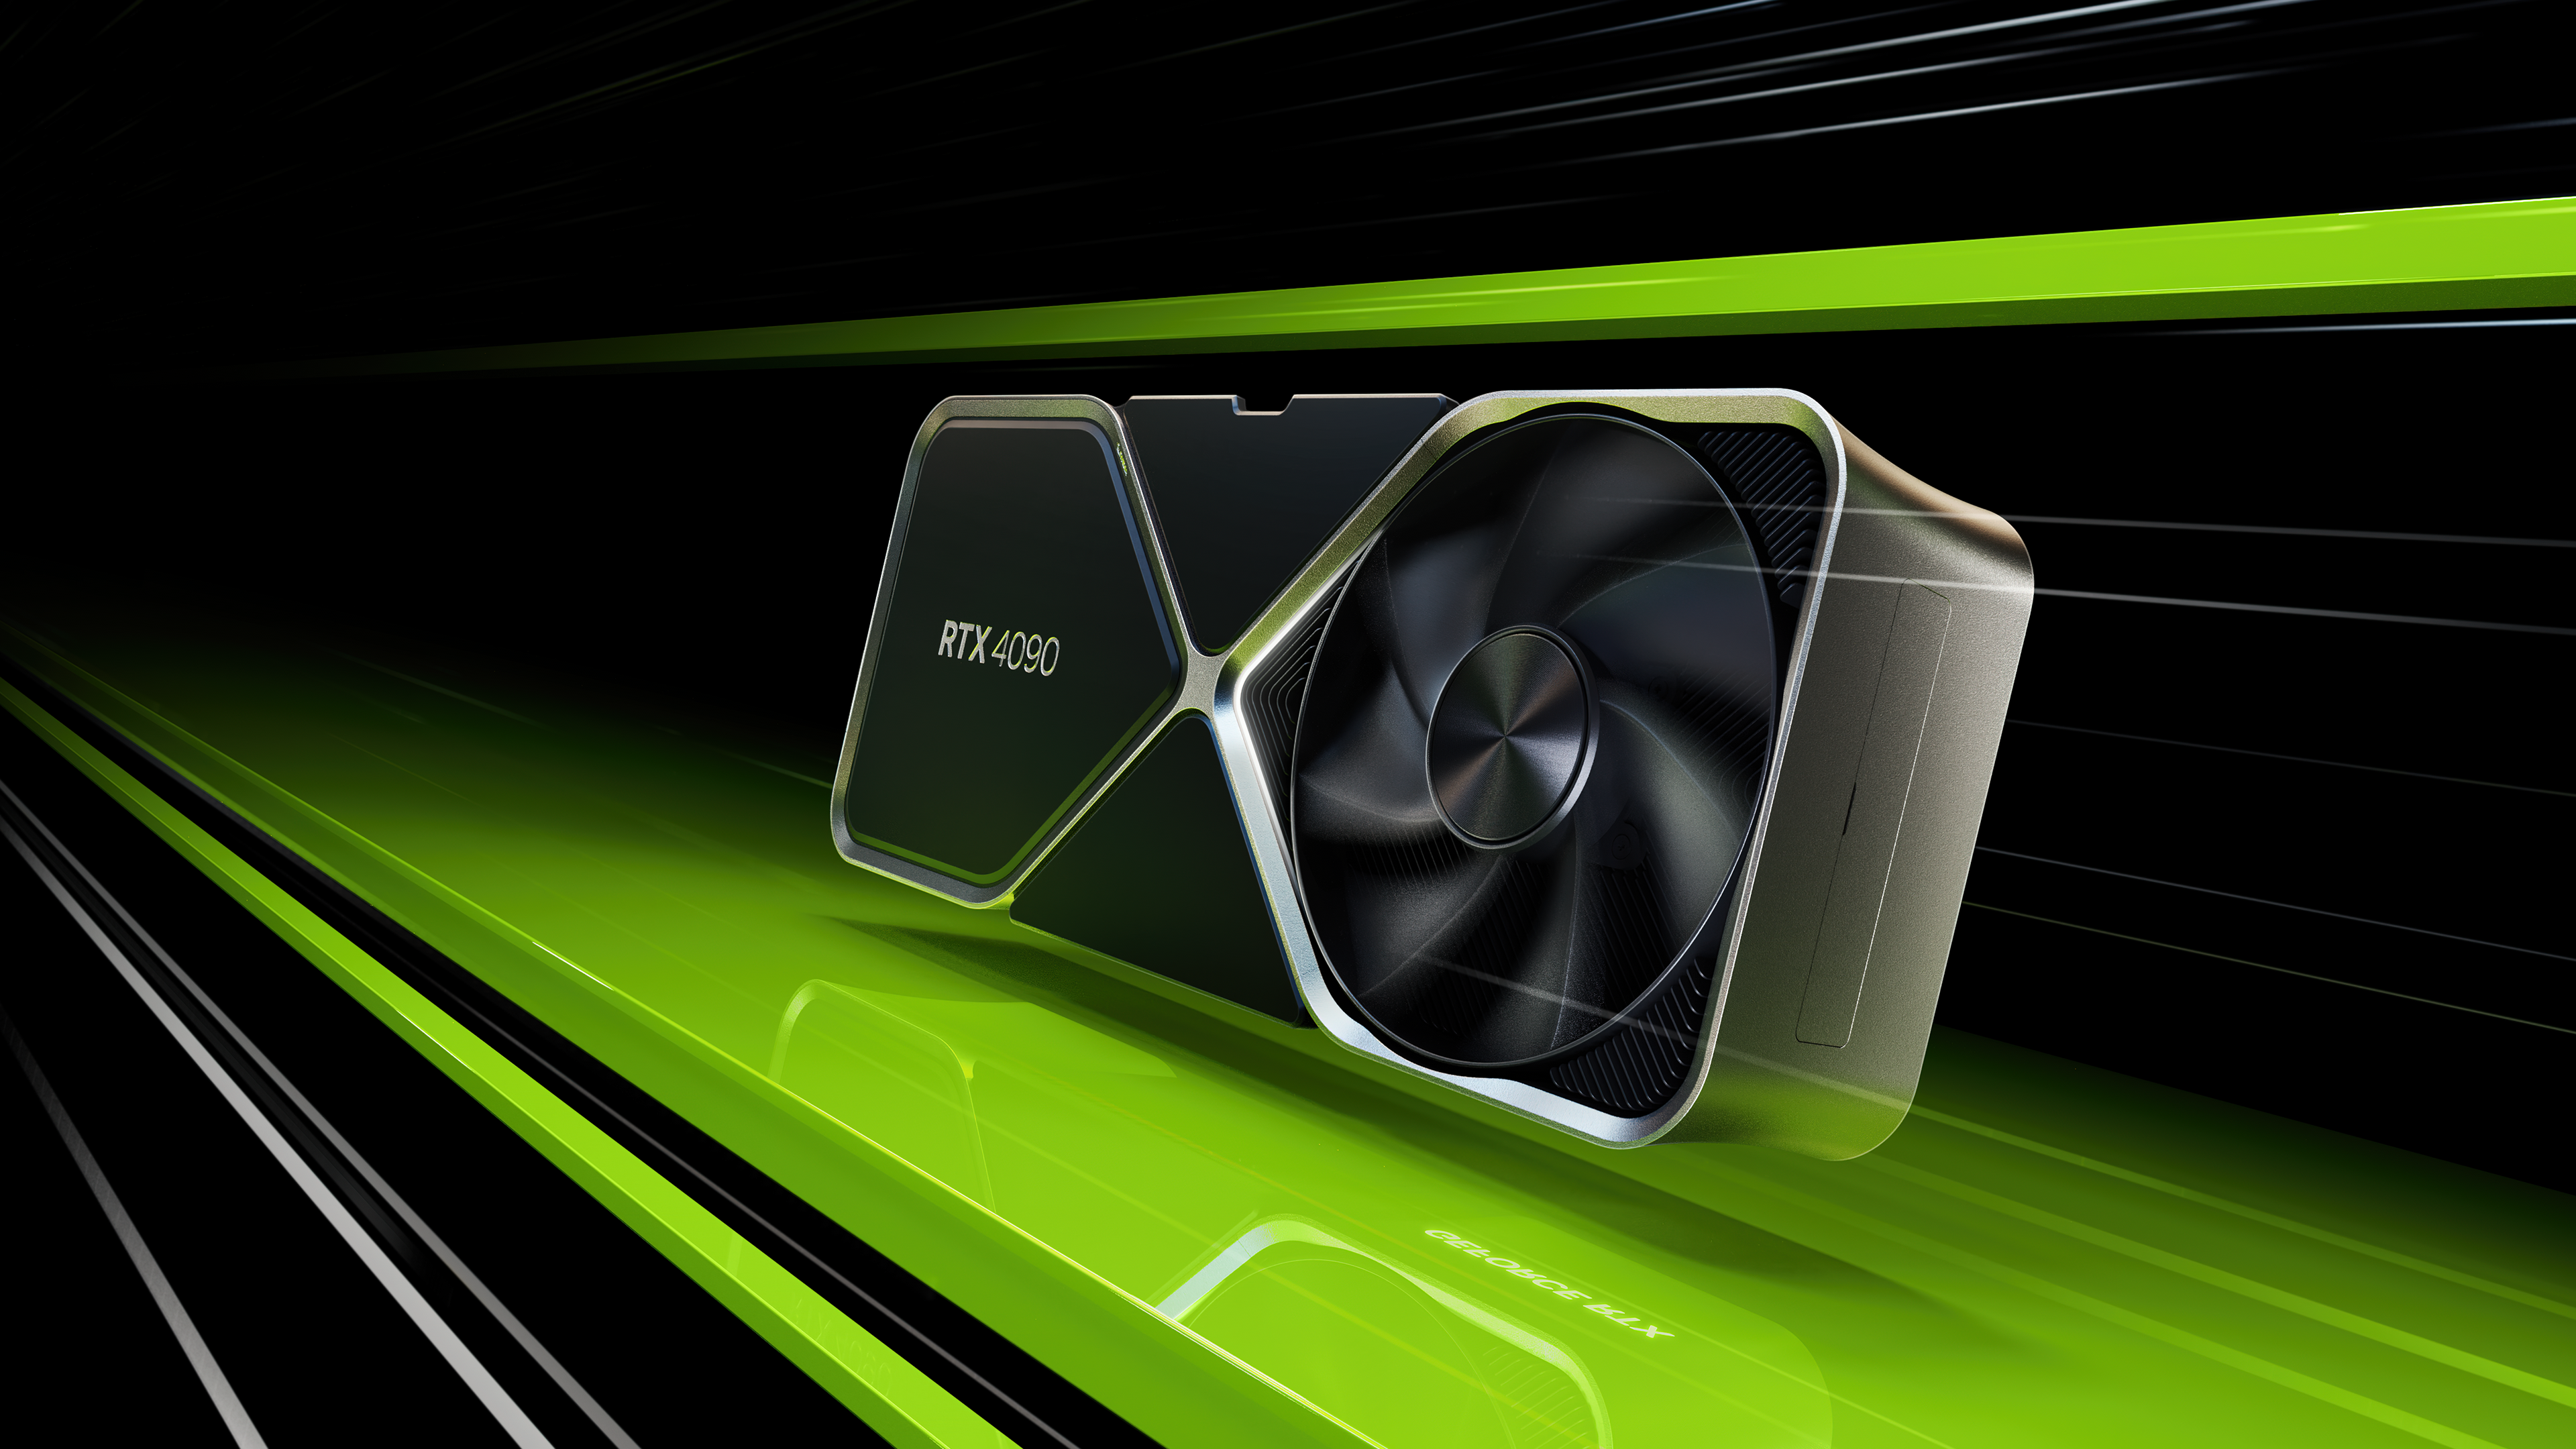 Investors Beware: Nvidia Stock Is 'Locked In A Pretty Substantial Downtrend'